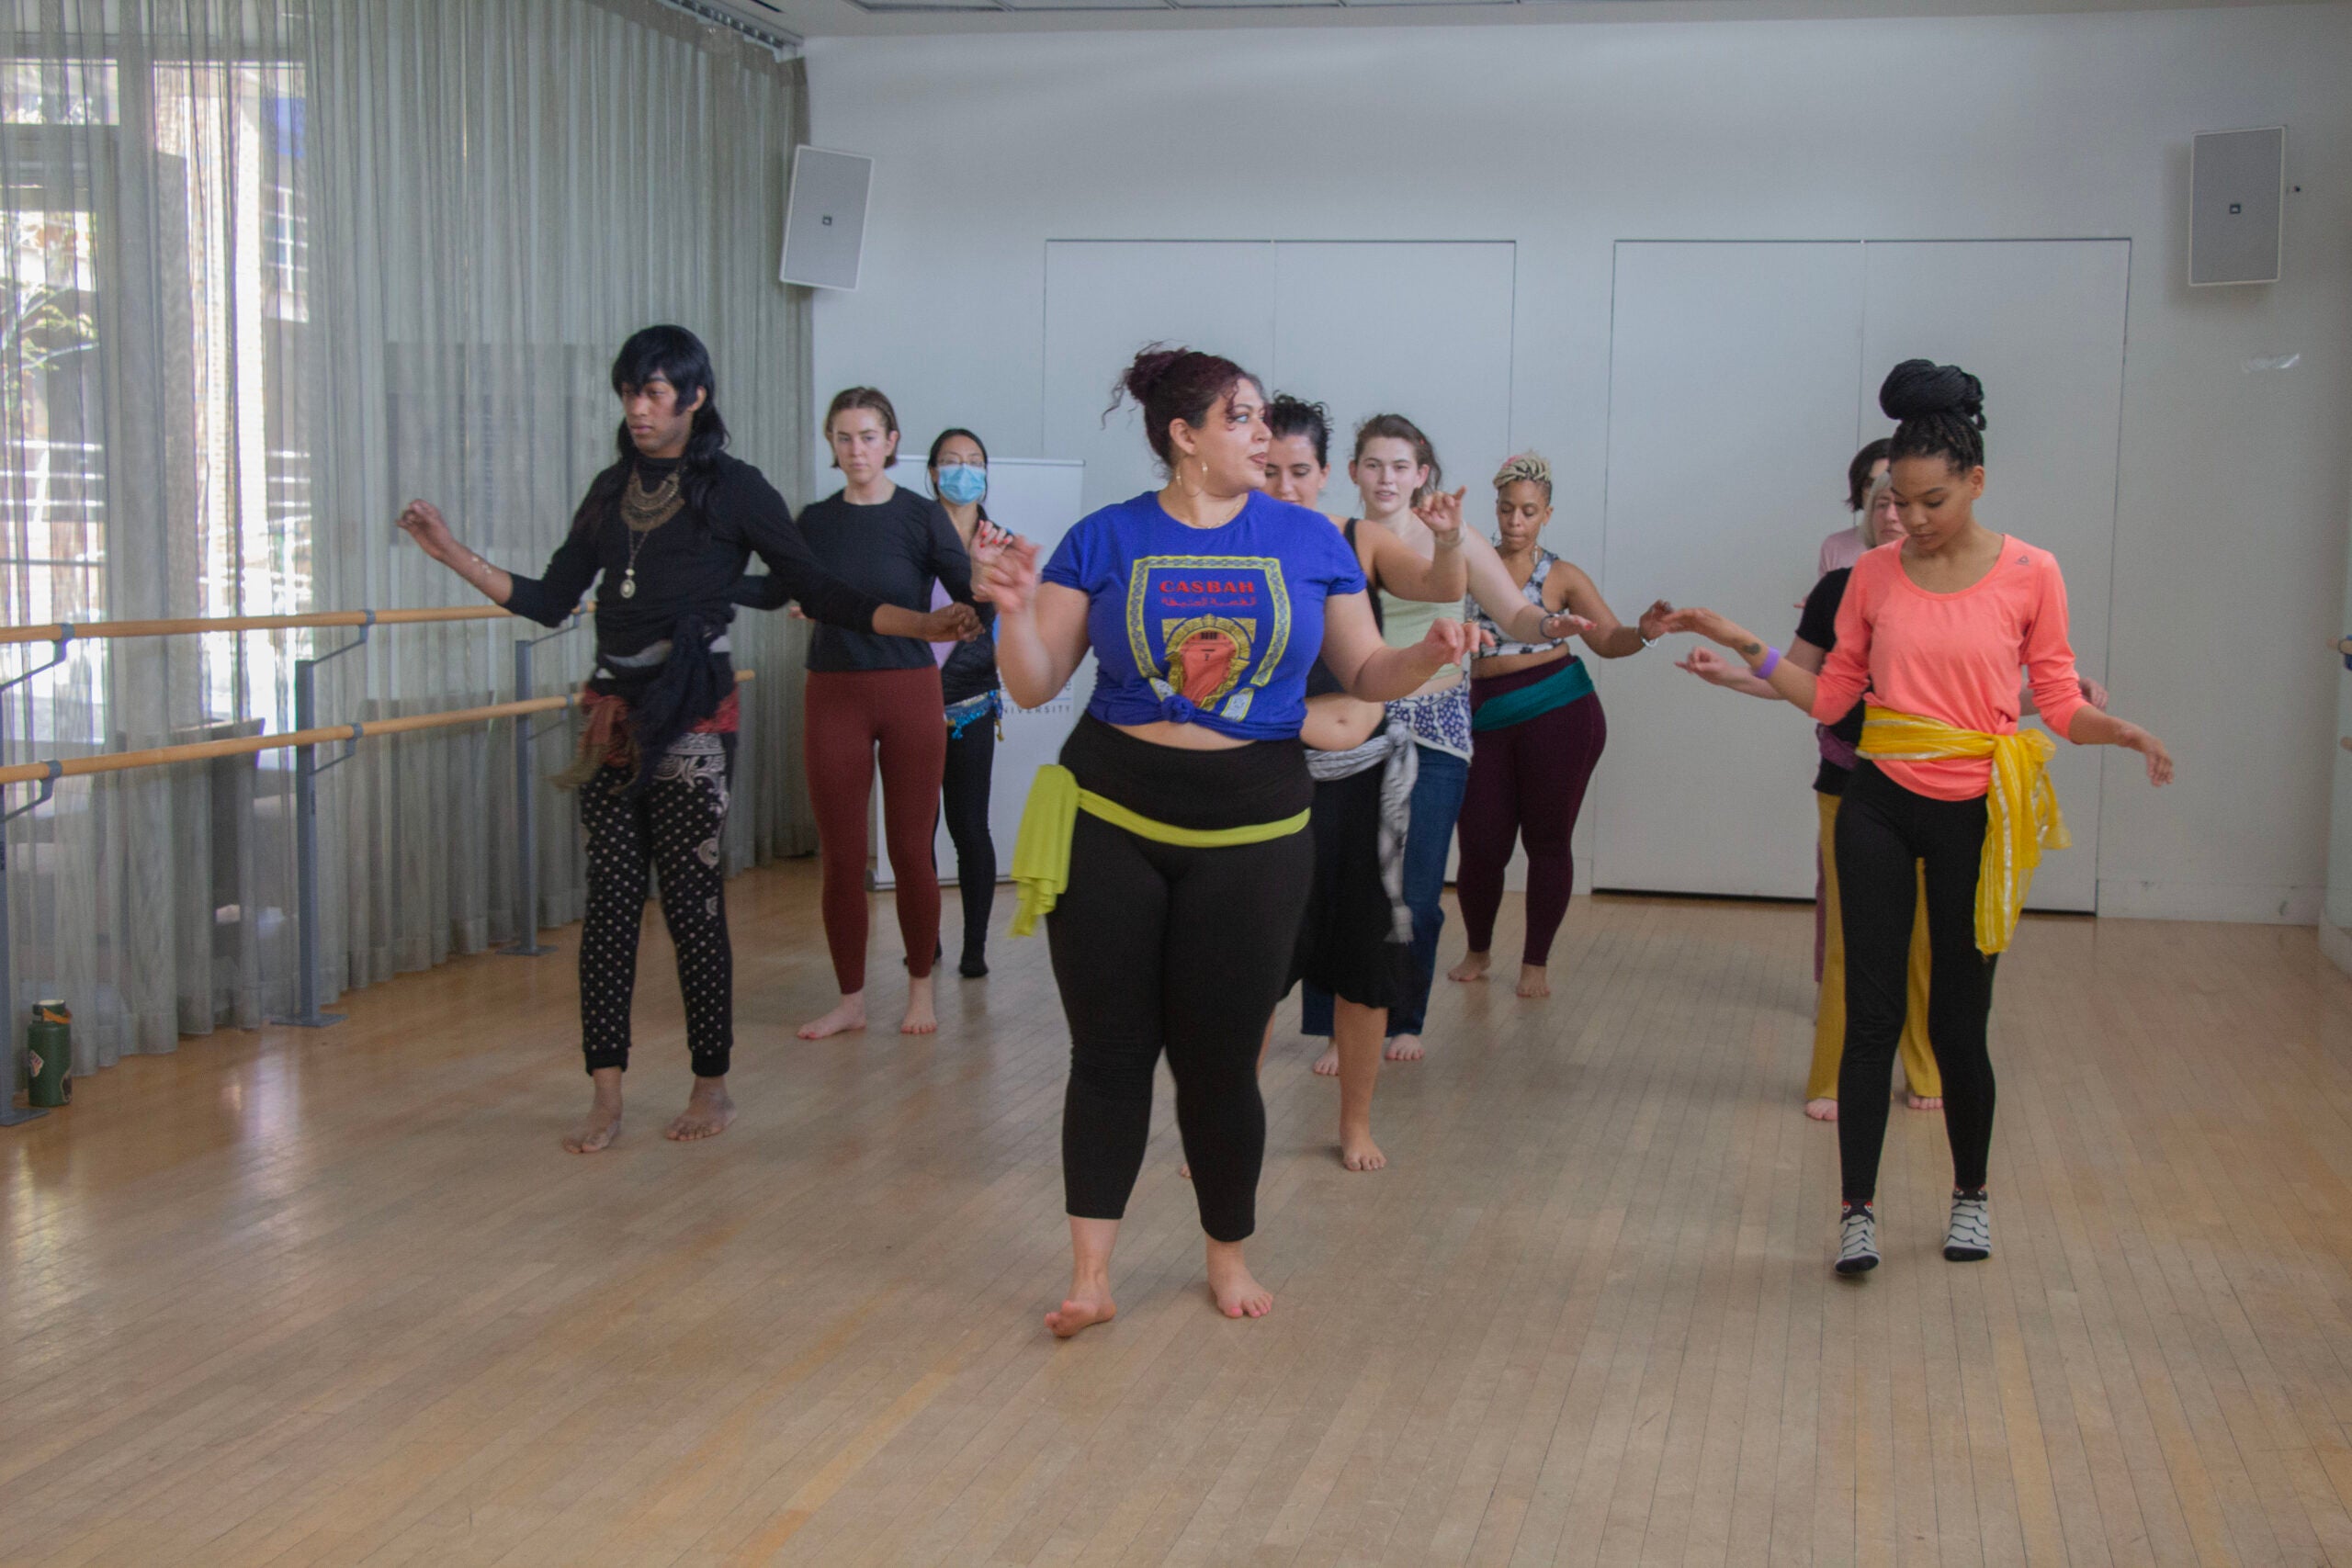 The dancers of various ethnicities and genders are in formation behind Warda, following her lead and instructions.